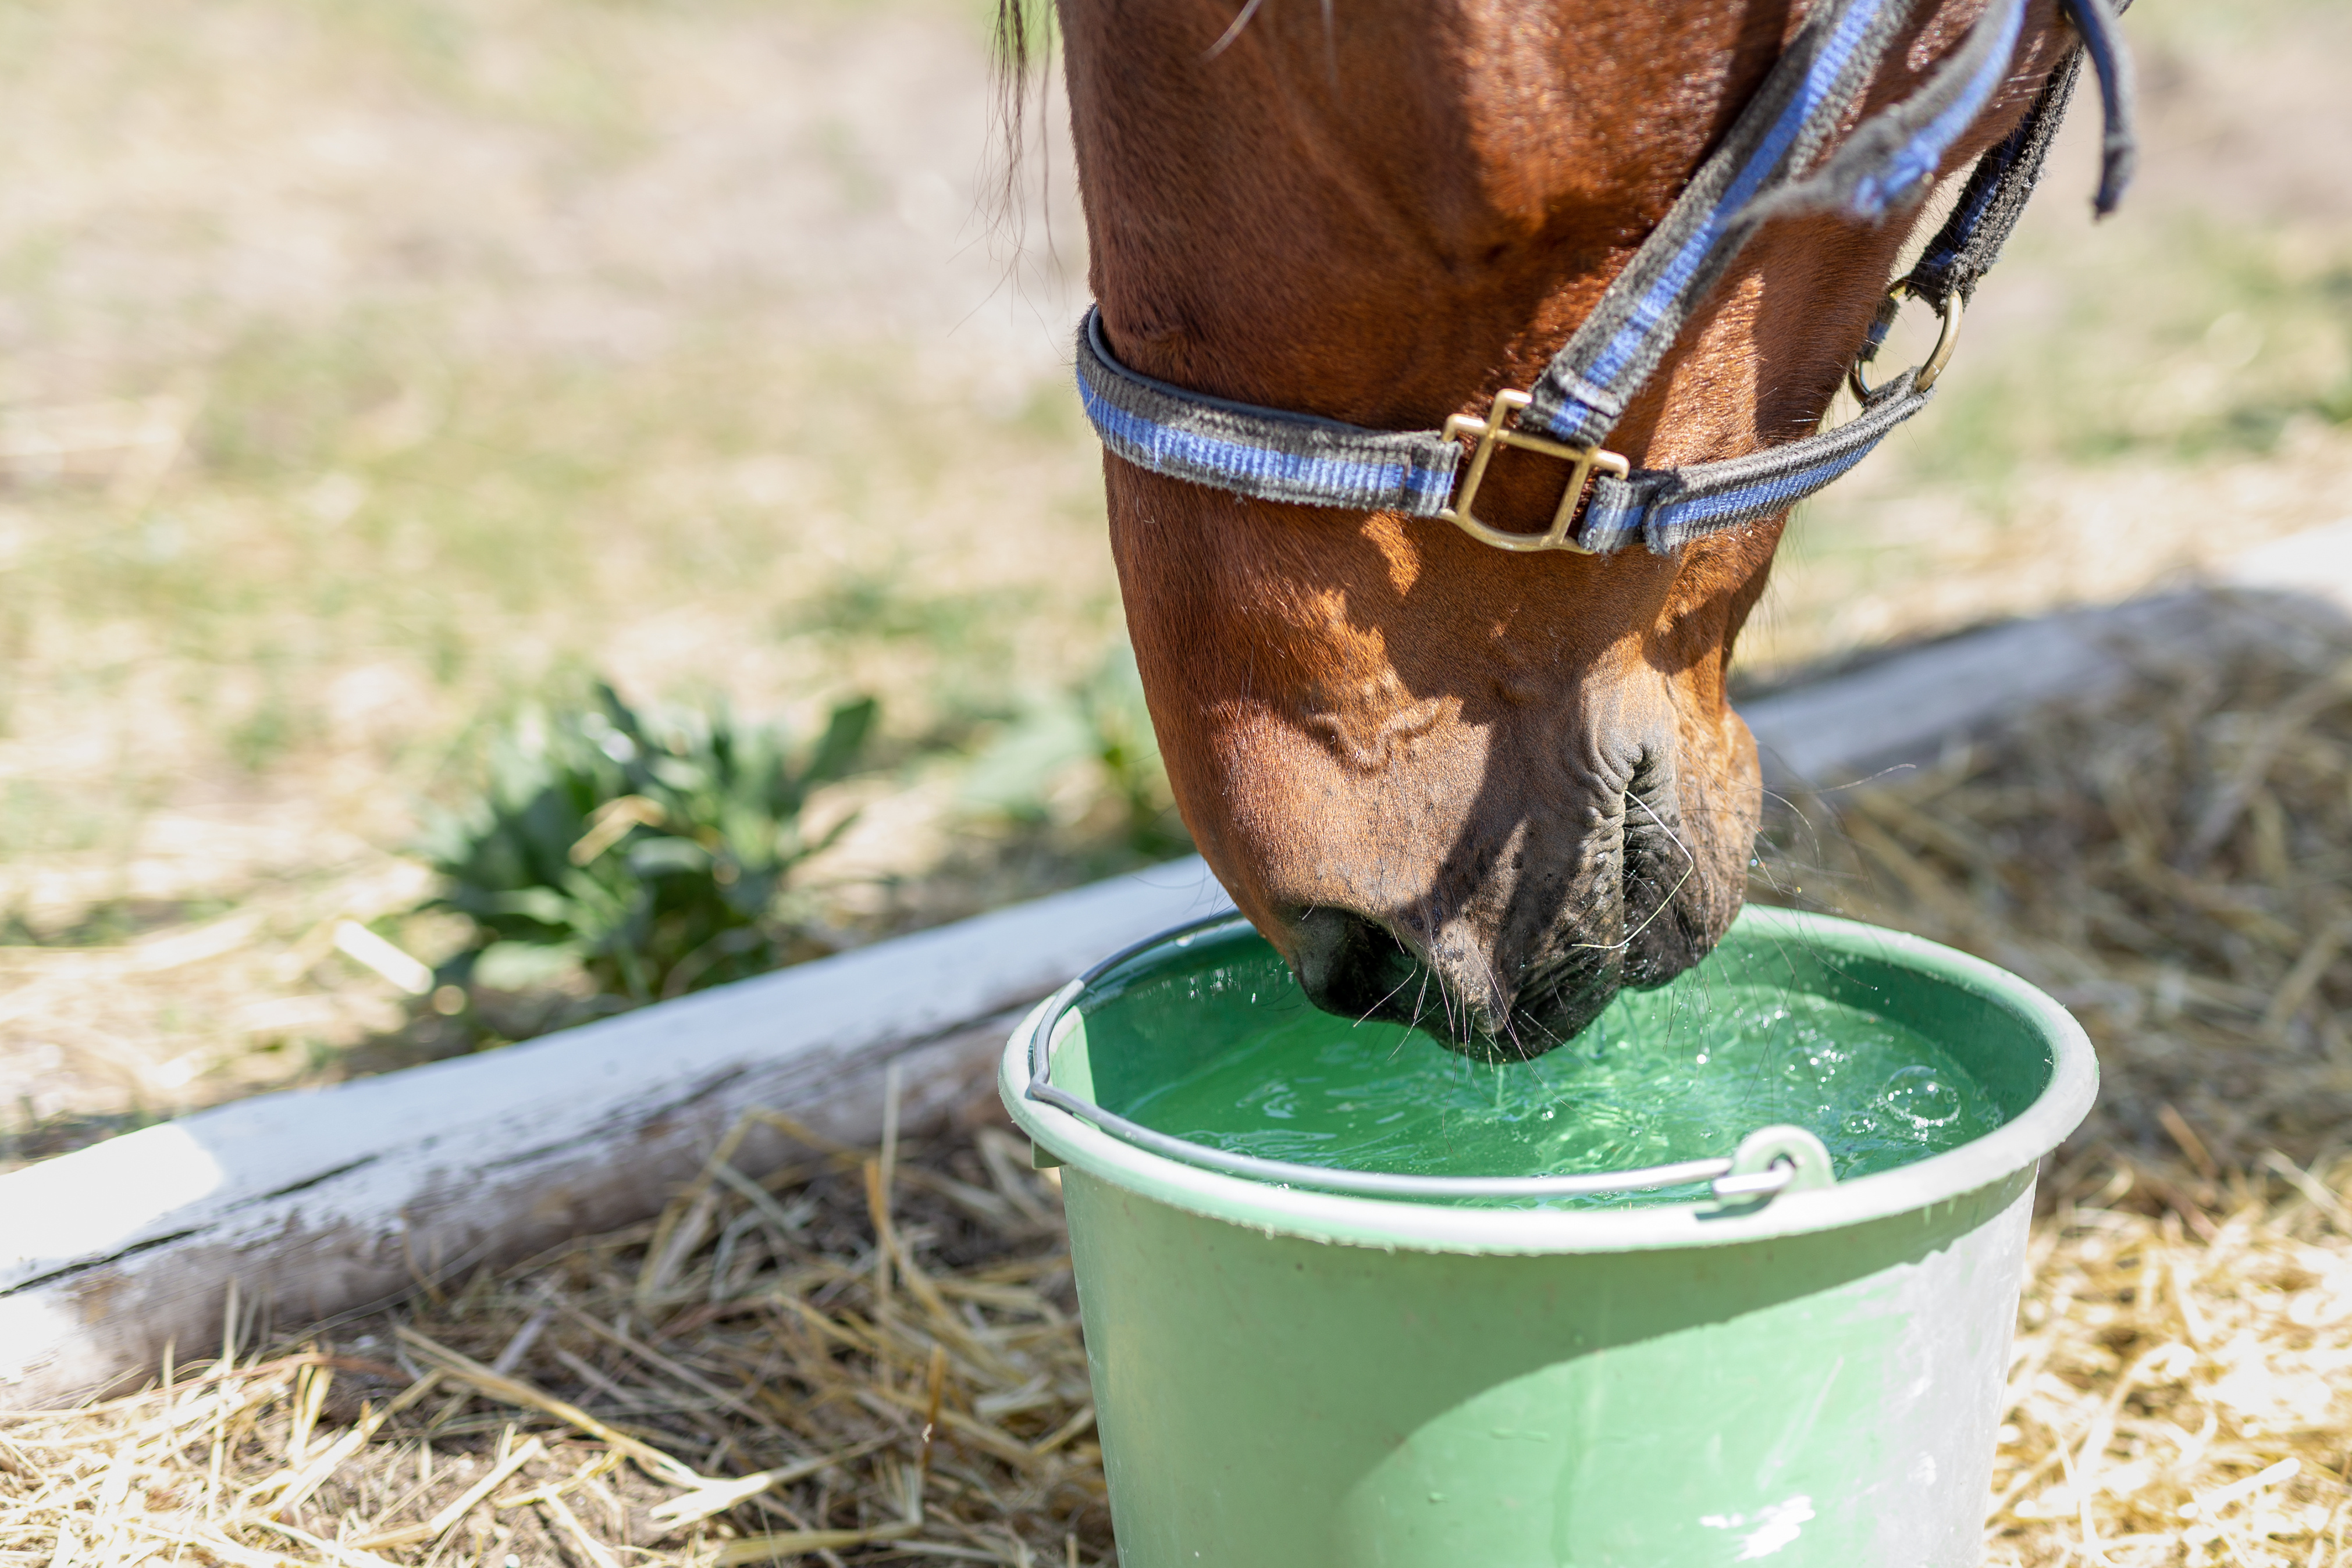 A horse drinking water from a green bucket.

